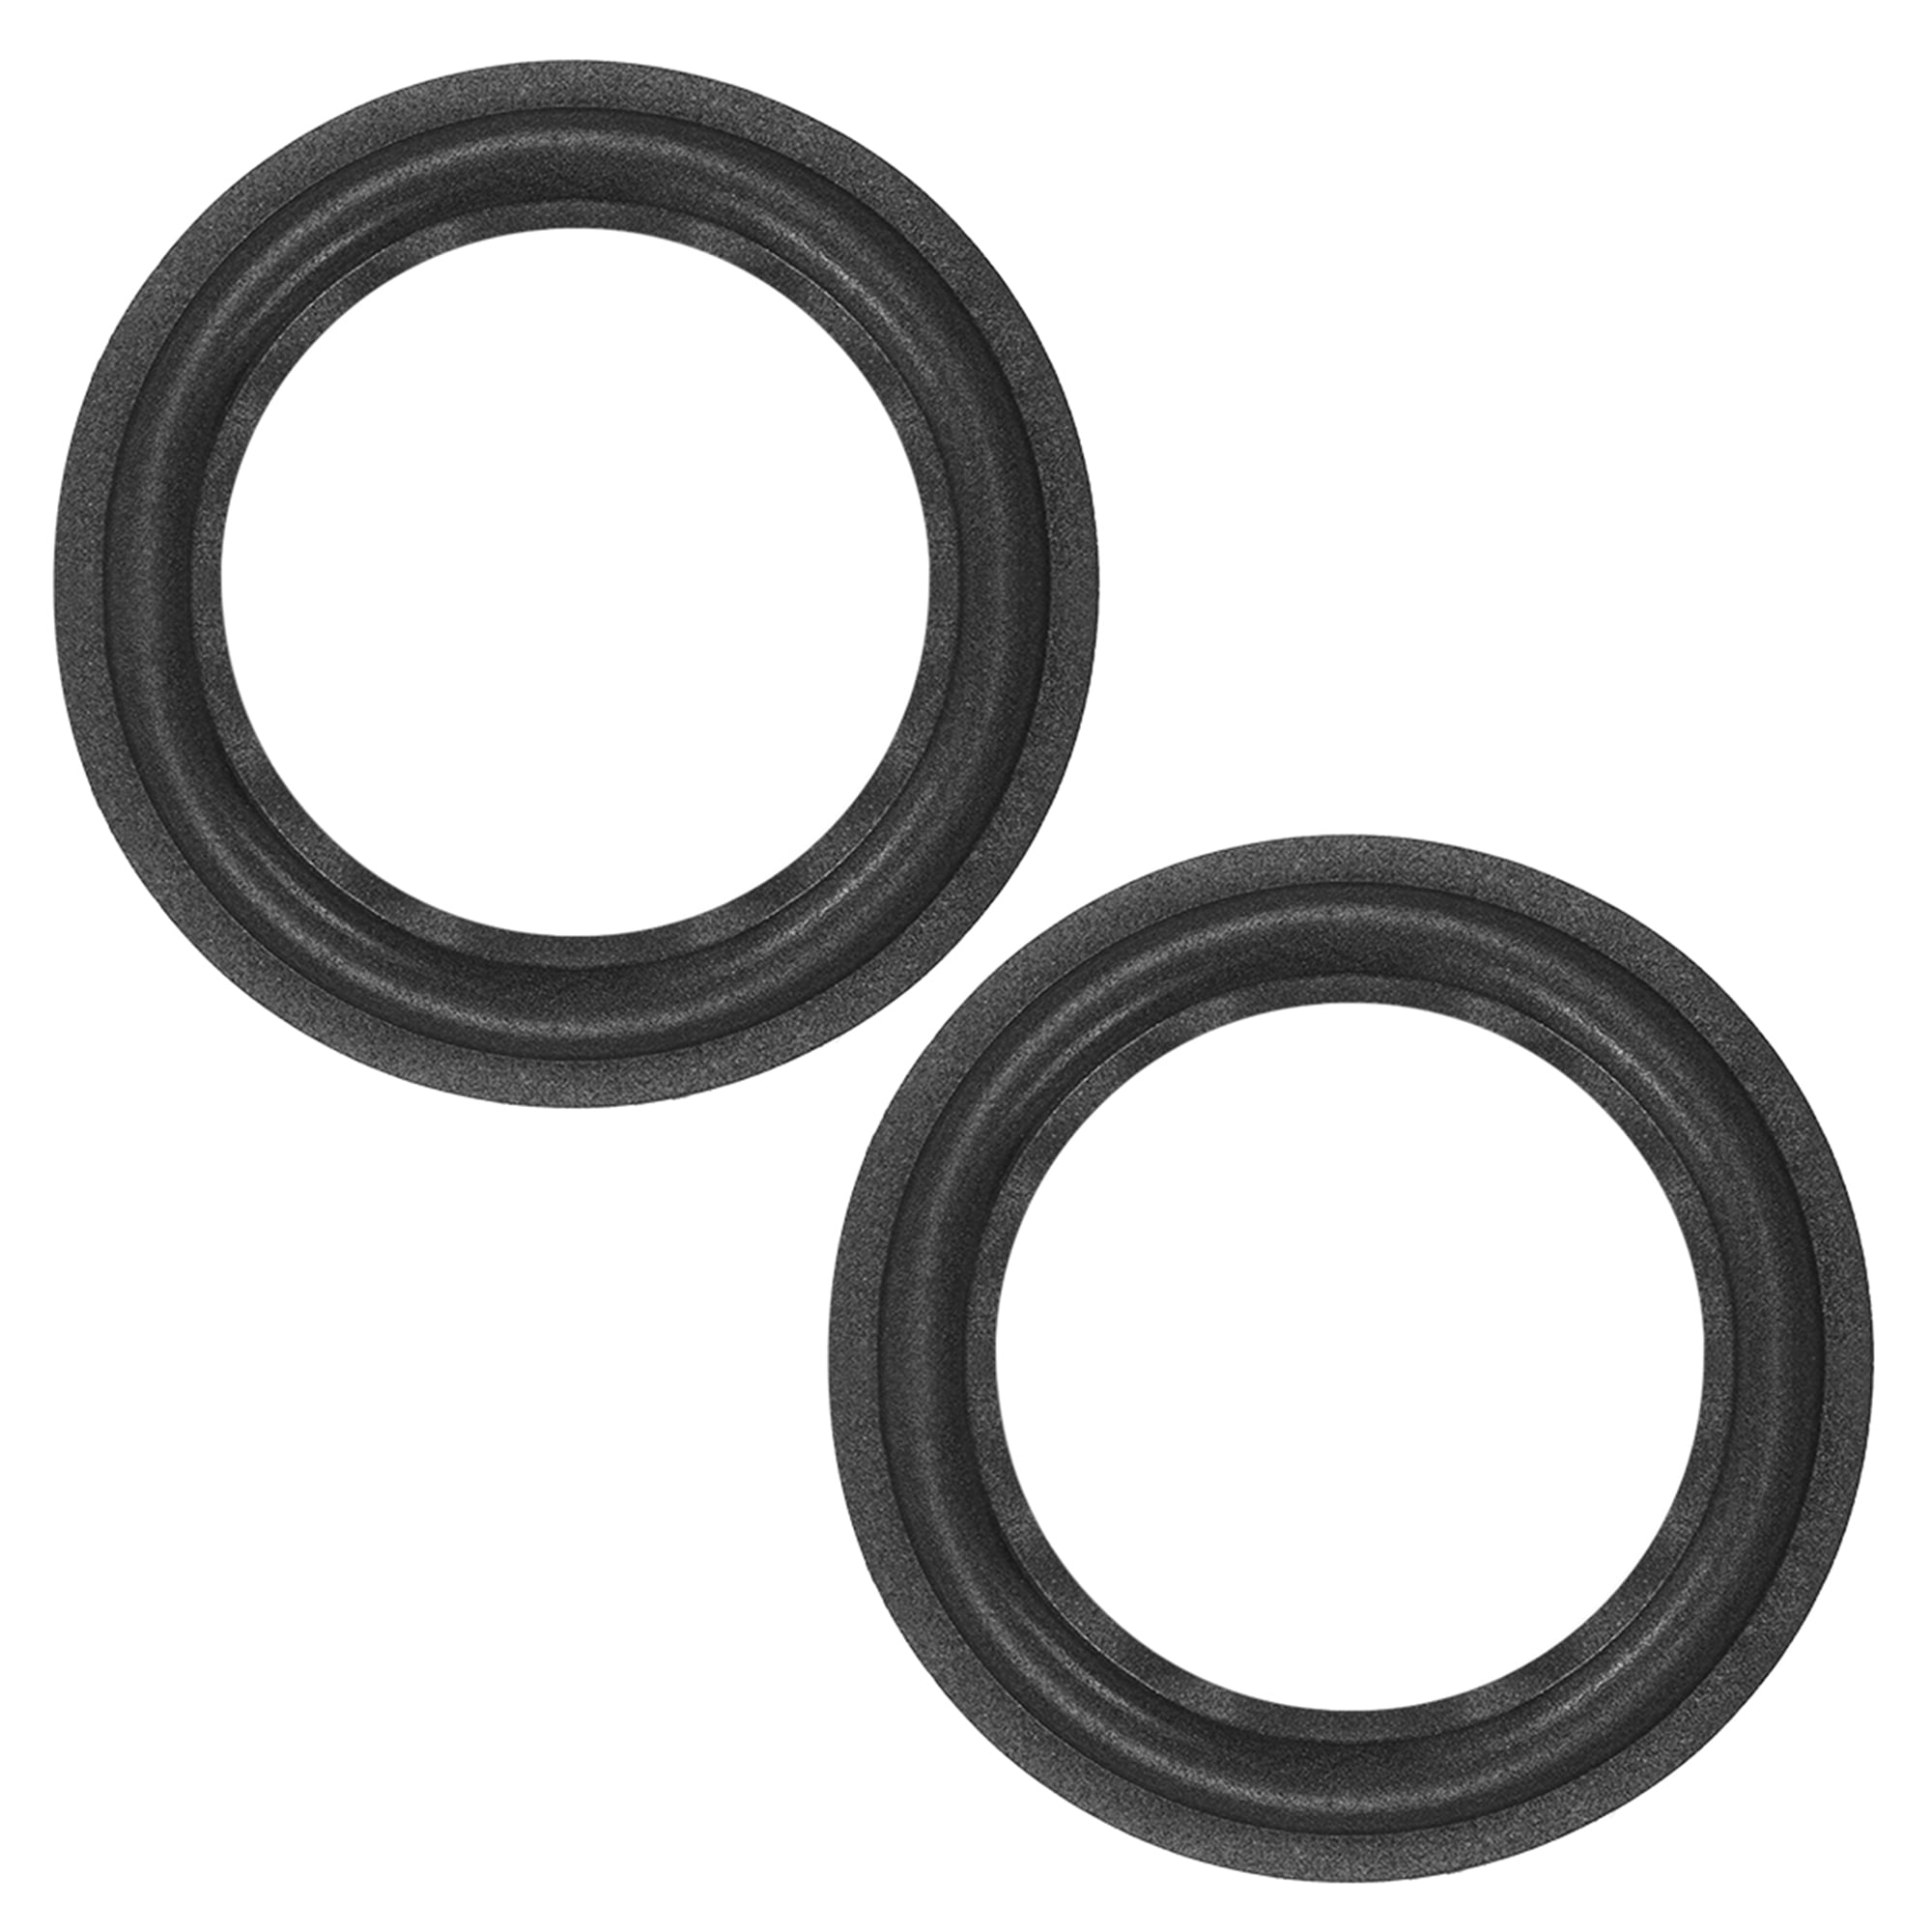 uxcell 6.5 inches 6.5 inches Speaker Foam Edge Surround Rings Replacement Parts for Speaker Repair or DIY 4pcs